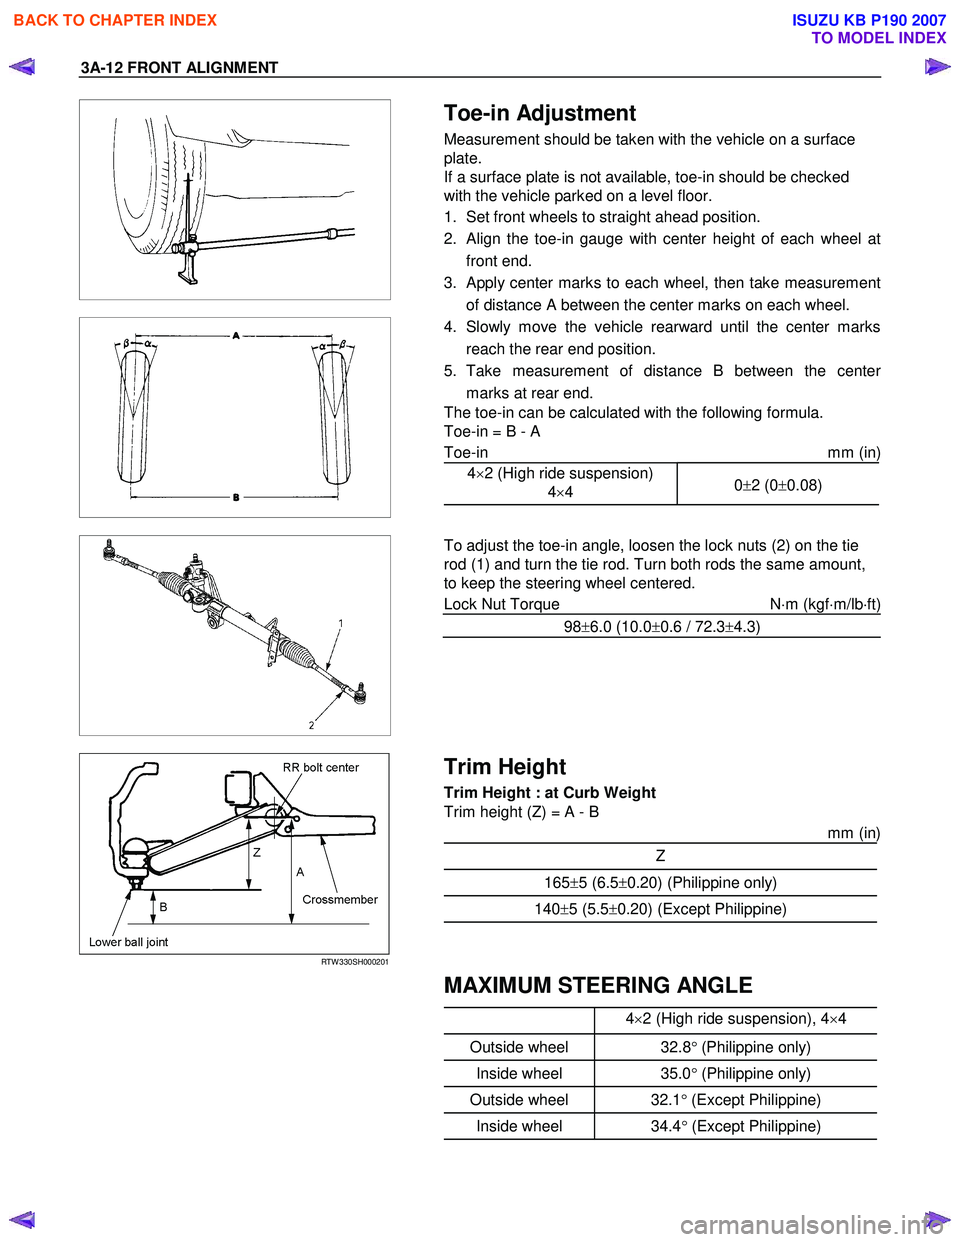 ISUZU KB P190 2007  Workshop Repair Manual 3A-12 FRONT ALIGNMENT 
 
  
 
 
 
 Toe-in Adjustment 
Measurement should be taken with the vehicle on a surface  
plate. 
If a surface plate is not available, toe-in should be checked 
with the vehicl